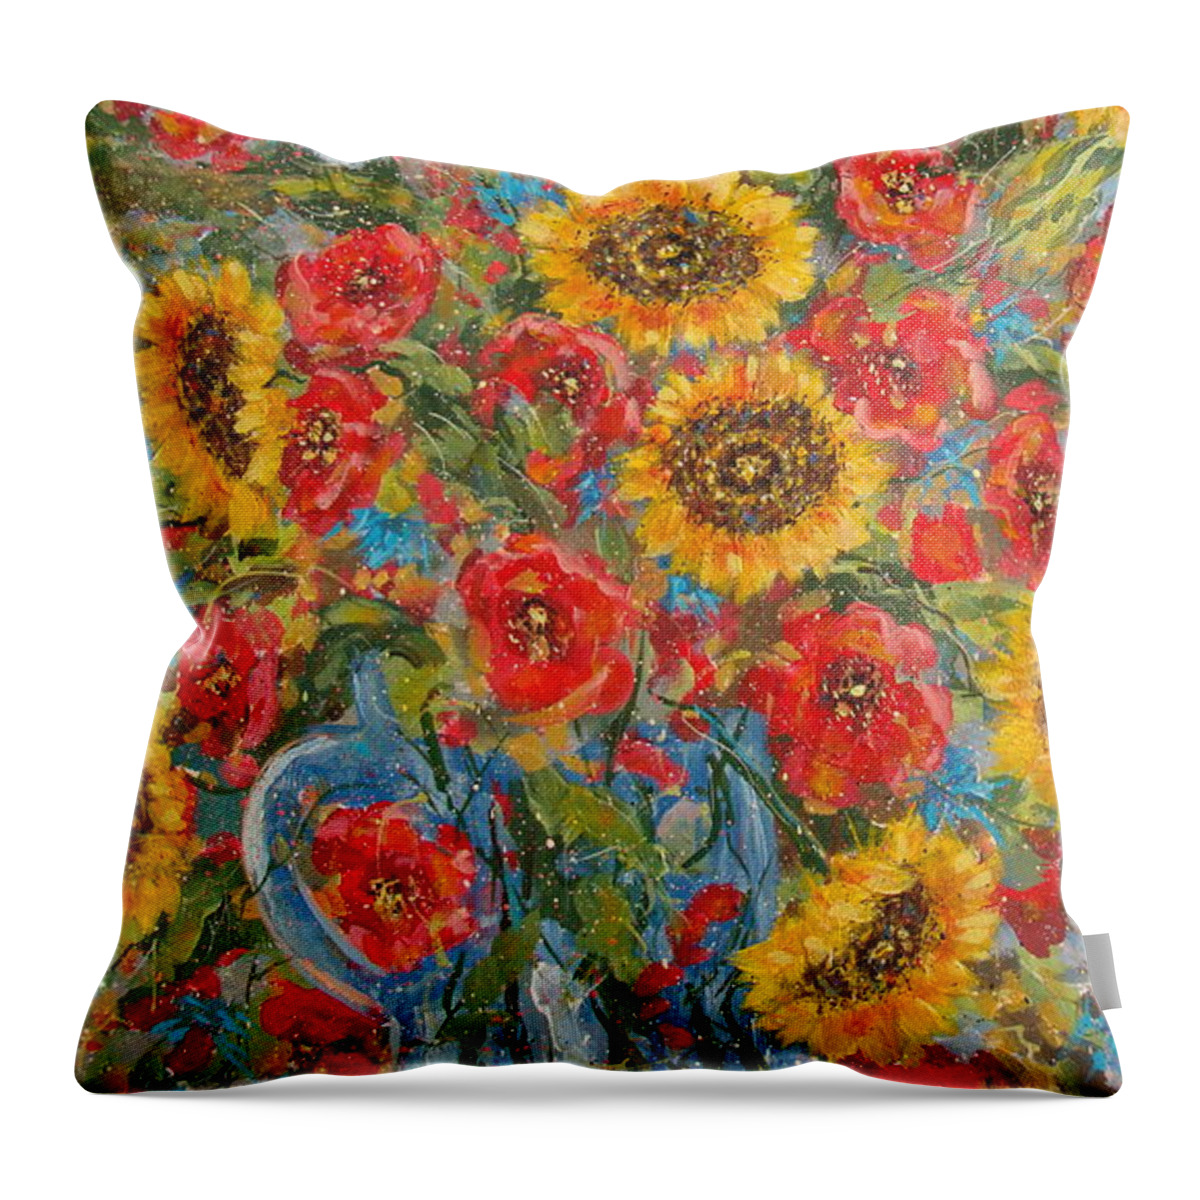 Sunflowers Throw Pillow featuring the painting Sunflowers In Blue Pitcher. by Leonard Holland